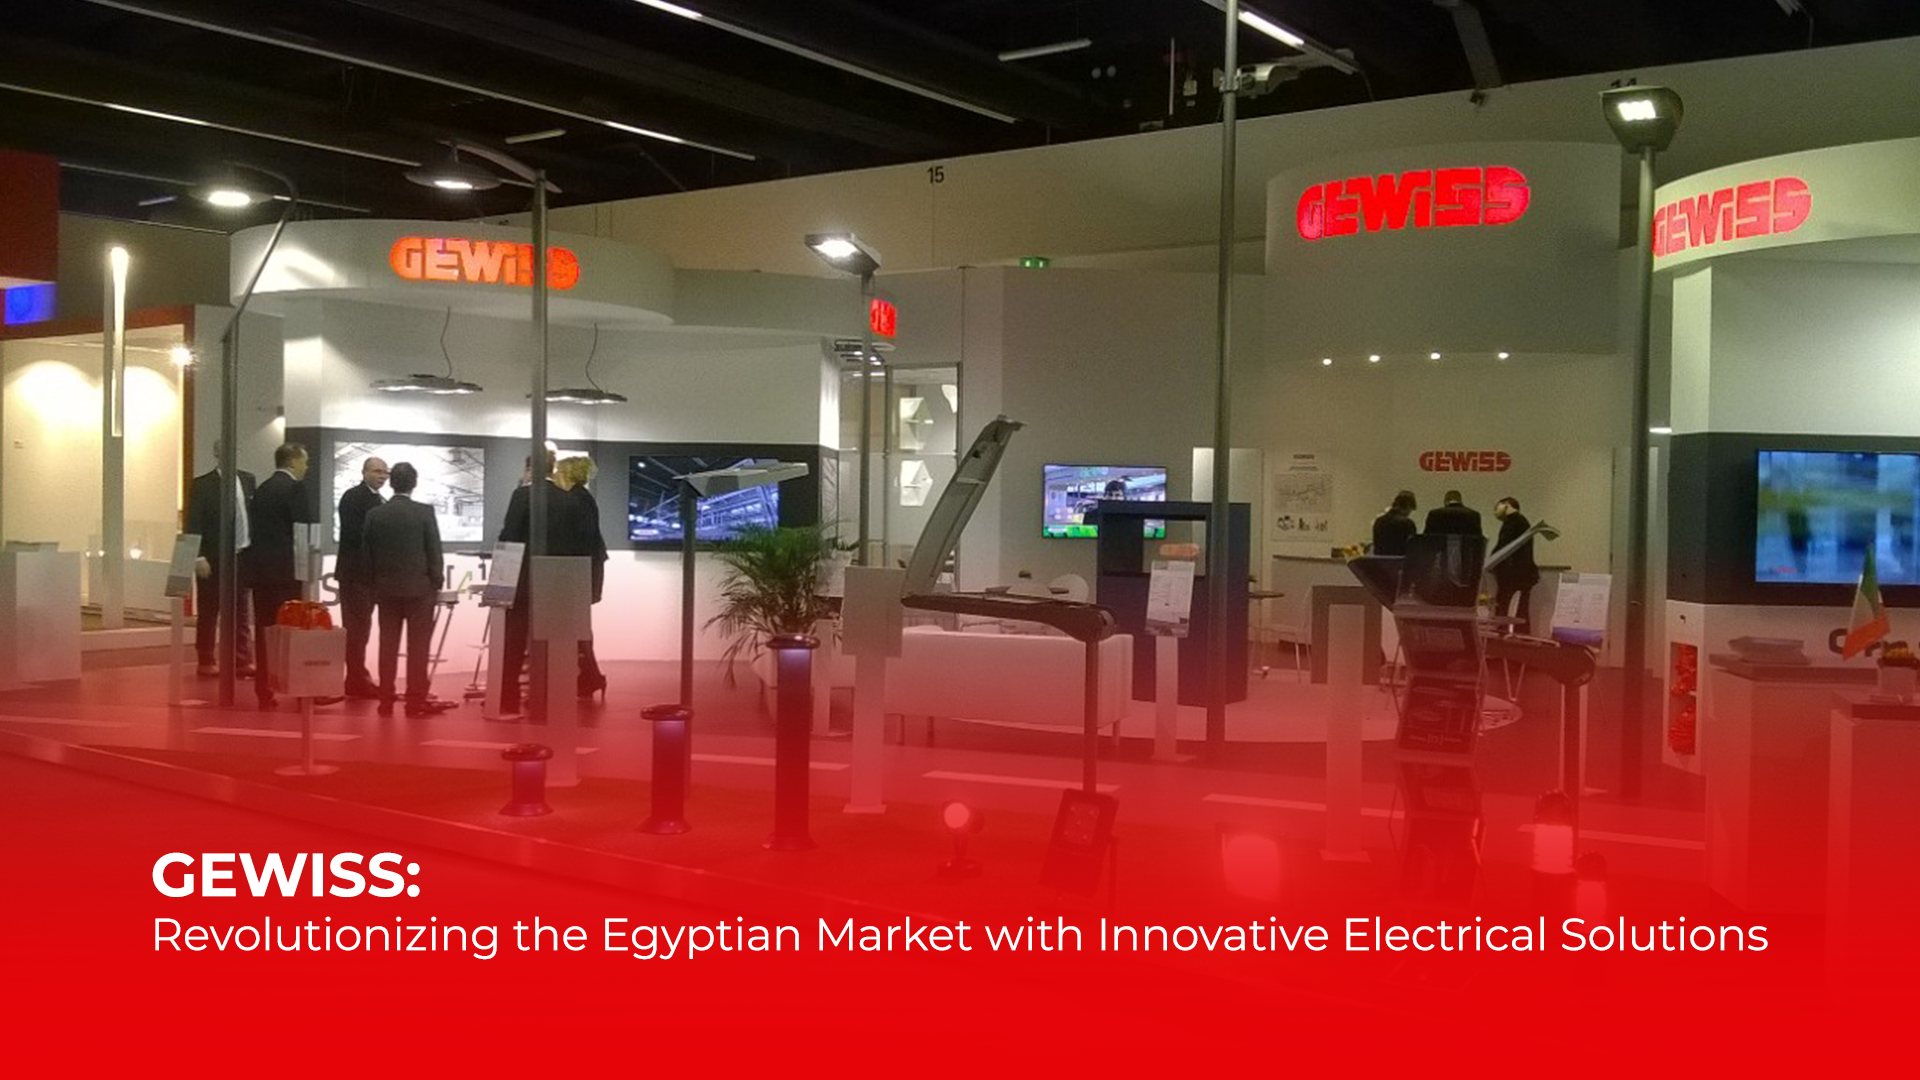 GEWISS: Revolutionizing the Egyptian Market with Innovative Electrical Solutions